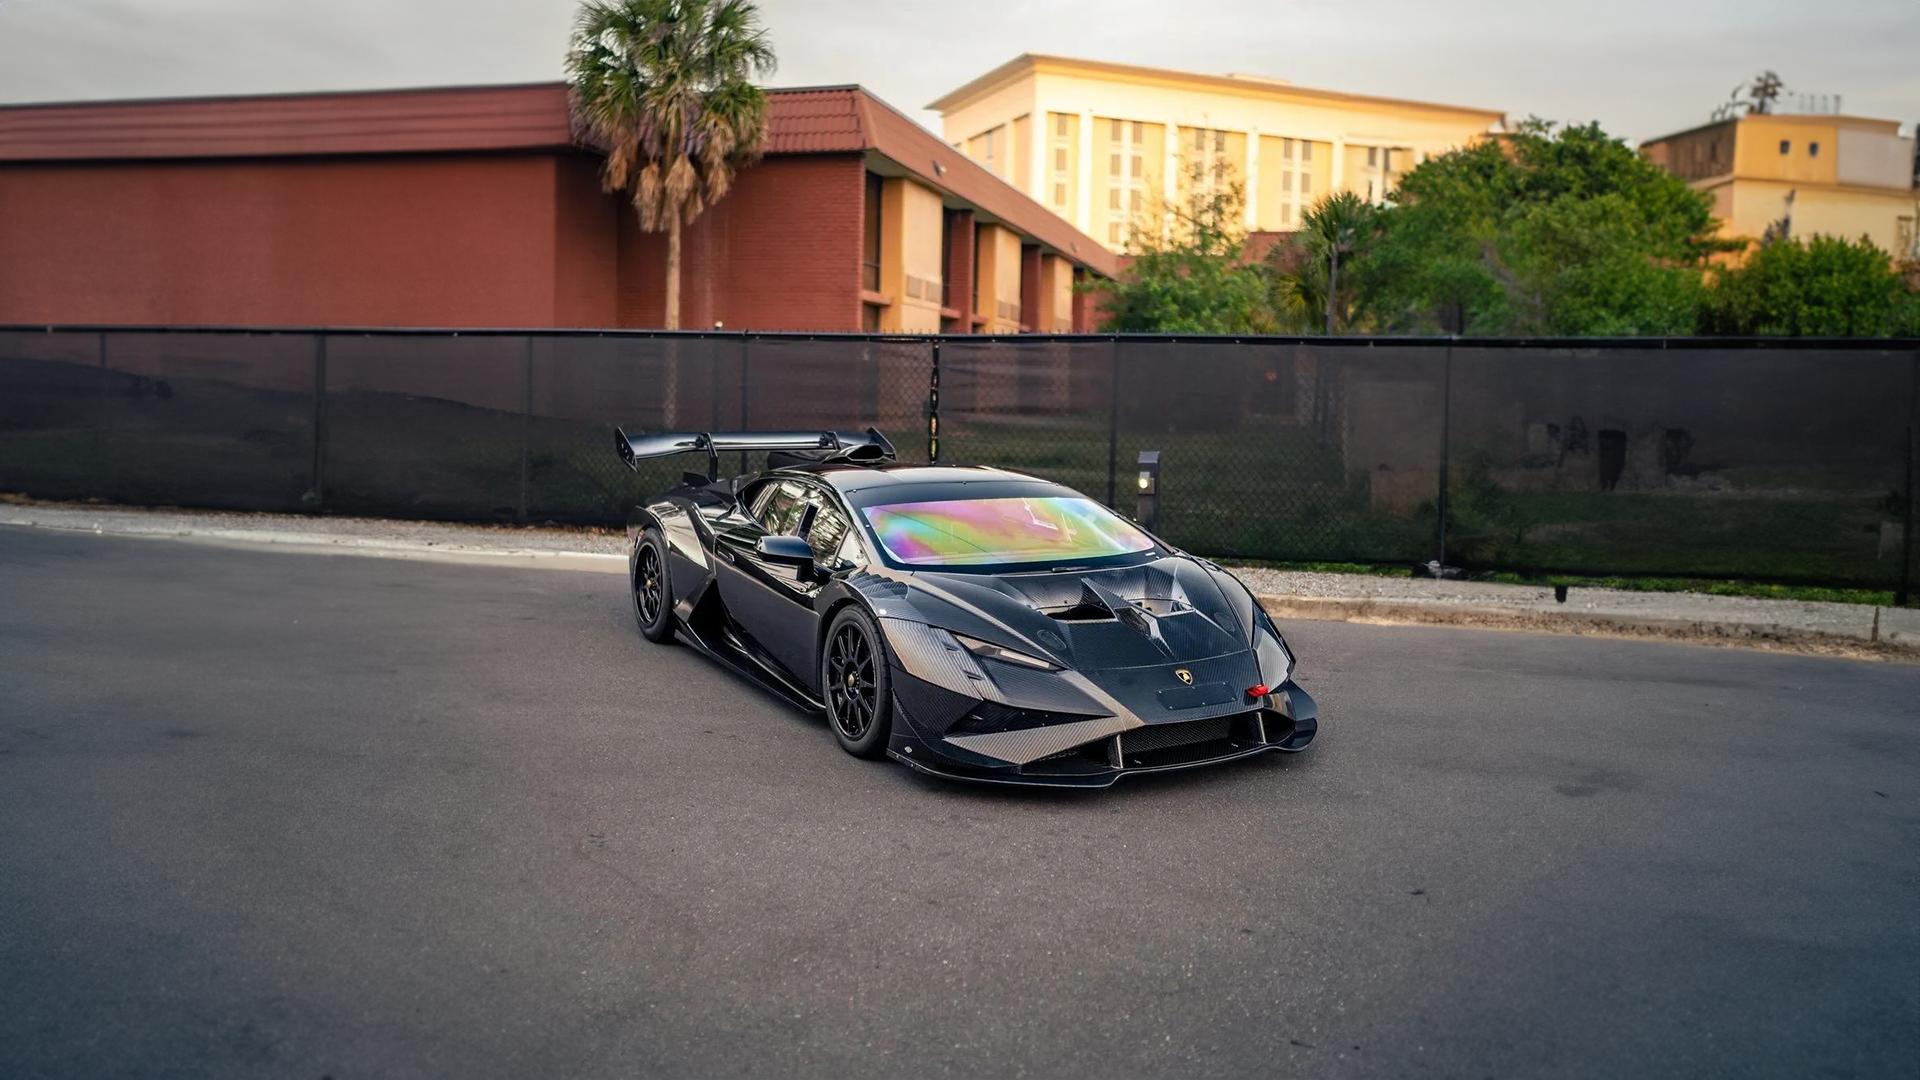 Lamborghini Huracan Road Palm Trees Car Front Angle View Fence Building Trees Vehicle 1920x1080